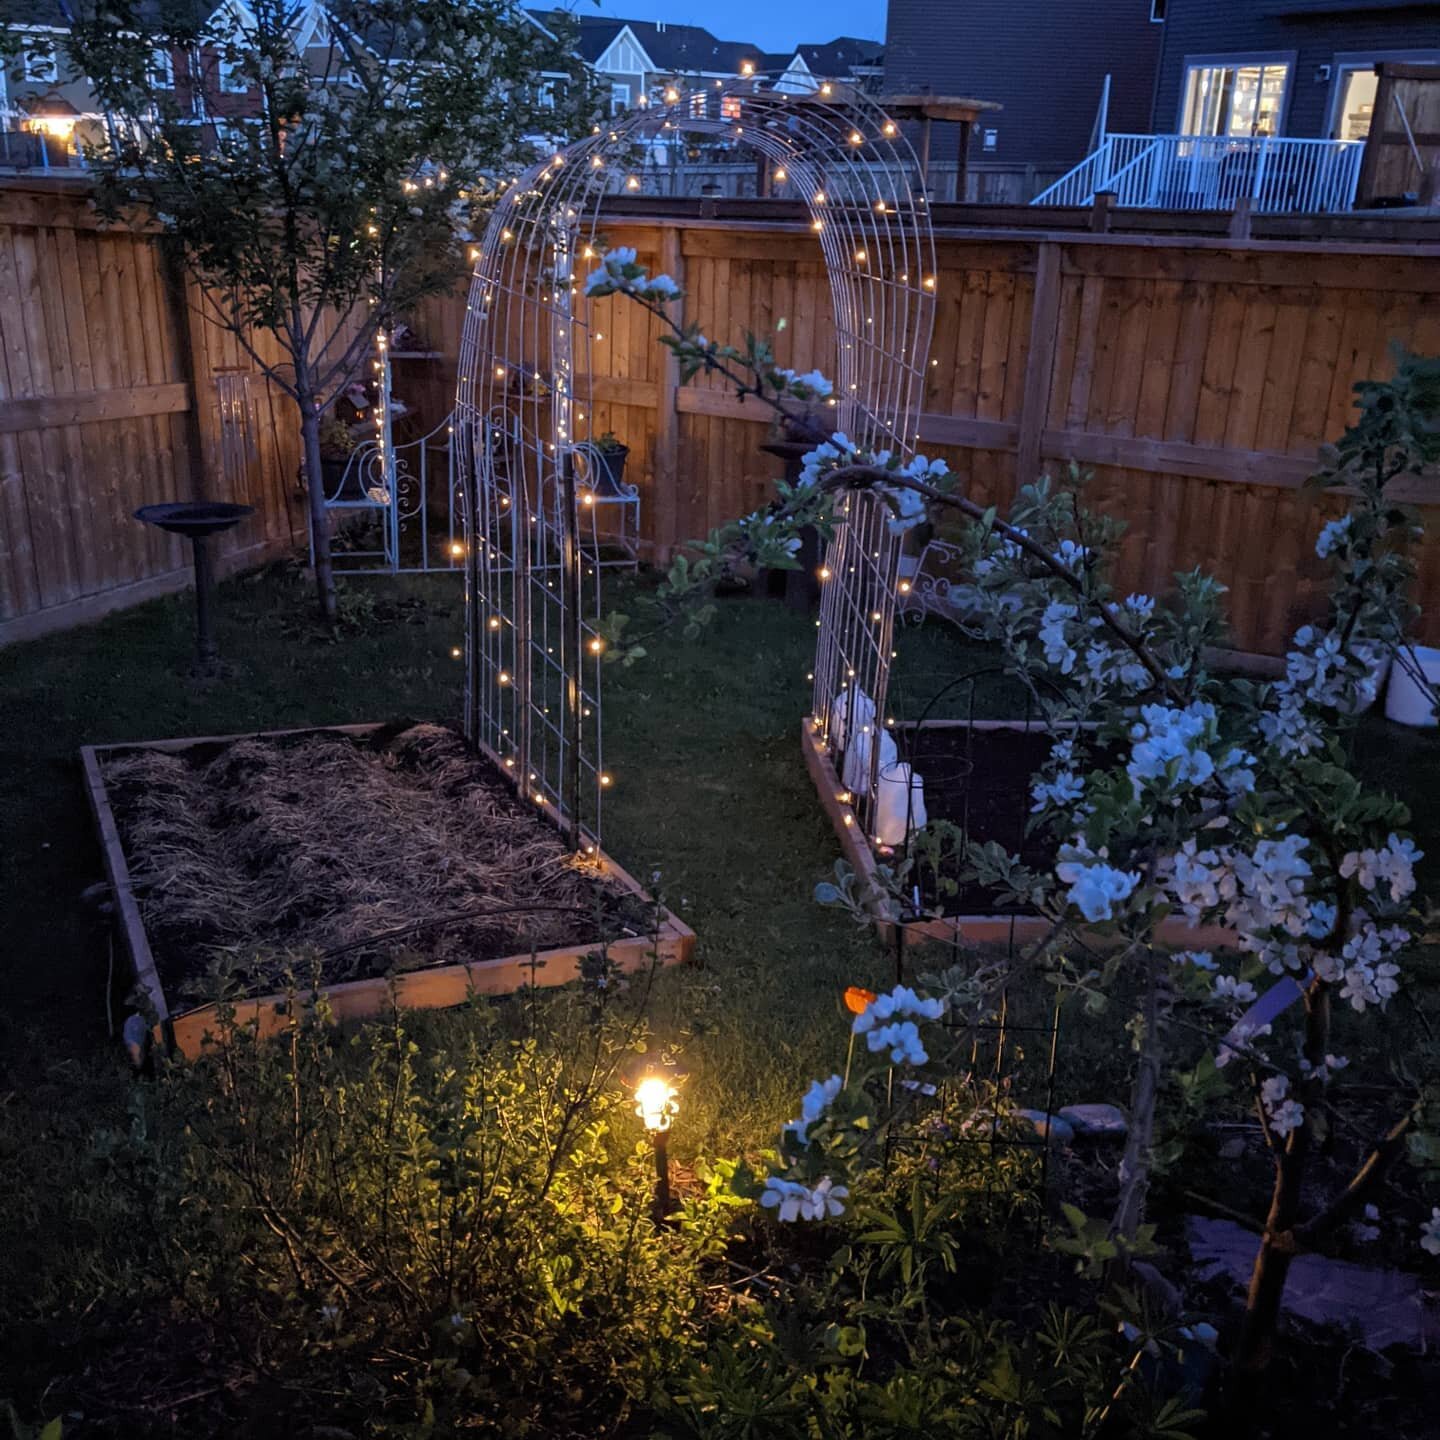 Warm and calm, a real treat up here on the ridge. Our whole family spilled into the garden tonight to admire the new tunnel that leads to the fairy garden. The kids loved it so much we got 20 (!) genuine minutes of teenager conversation.

For us, the